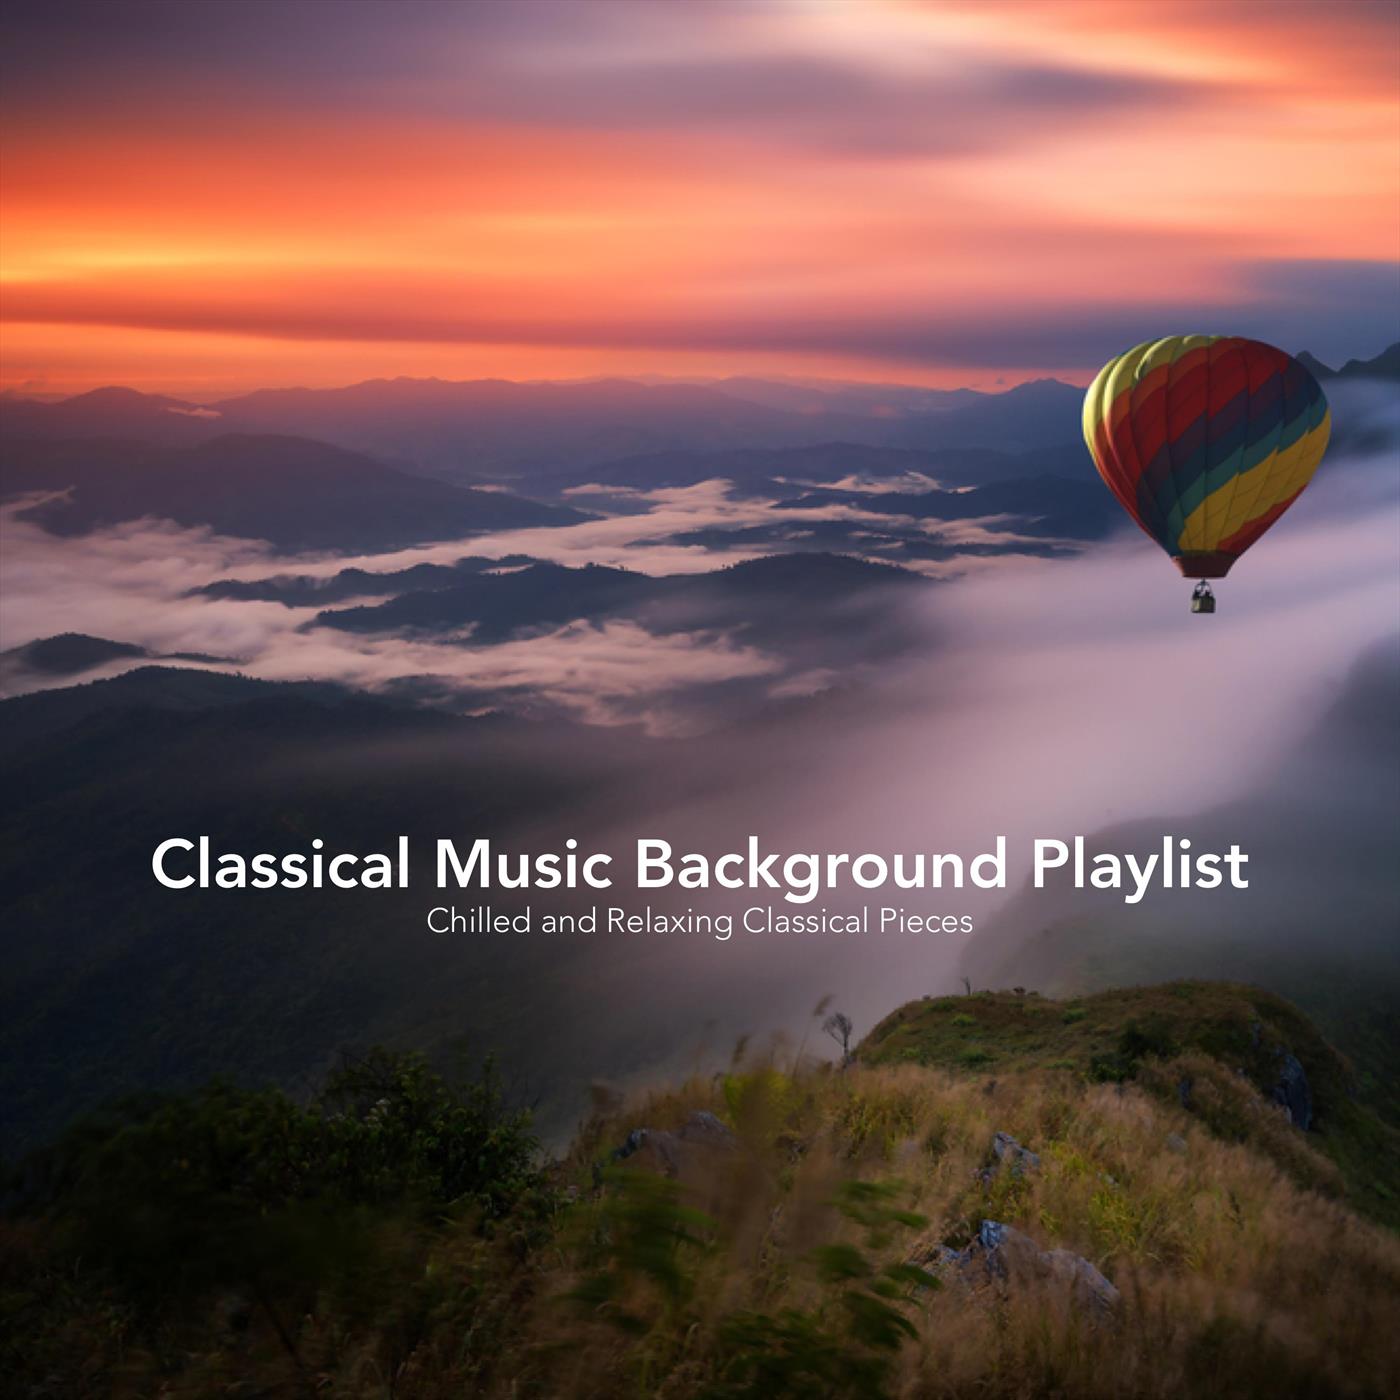 Classical Music Background Playlist: Chilled and Relaxing Classical Pieces